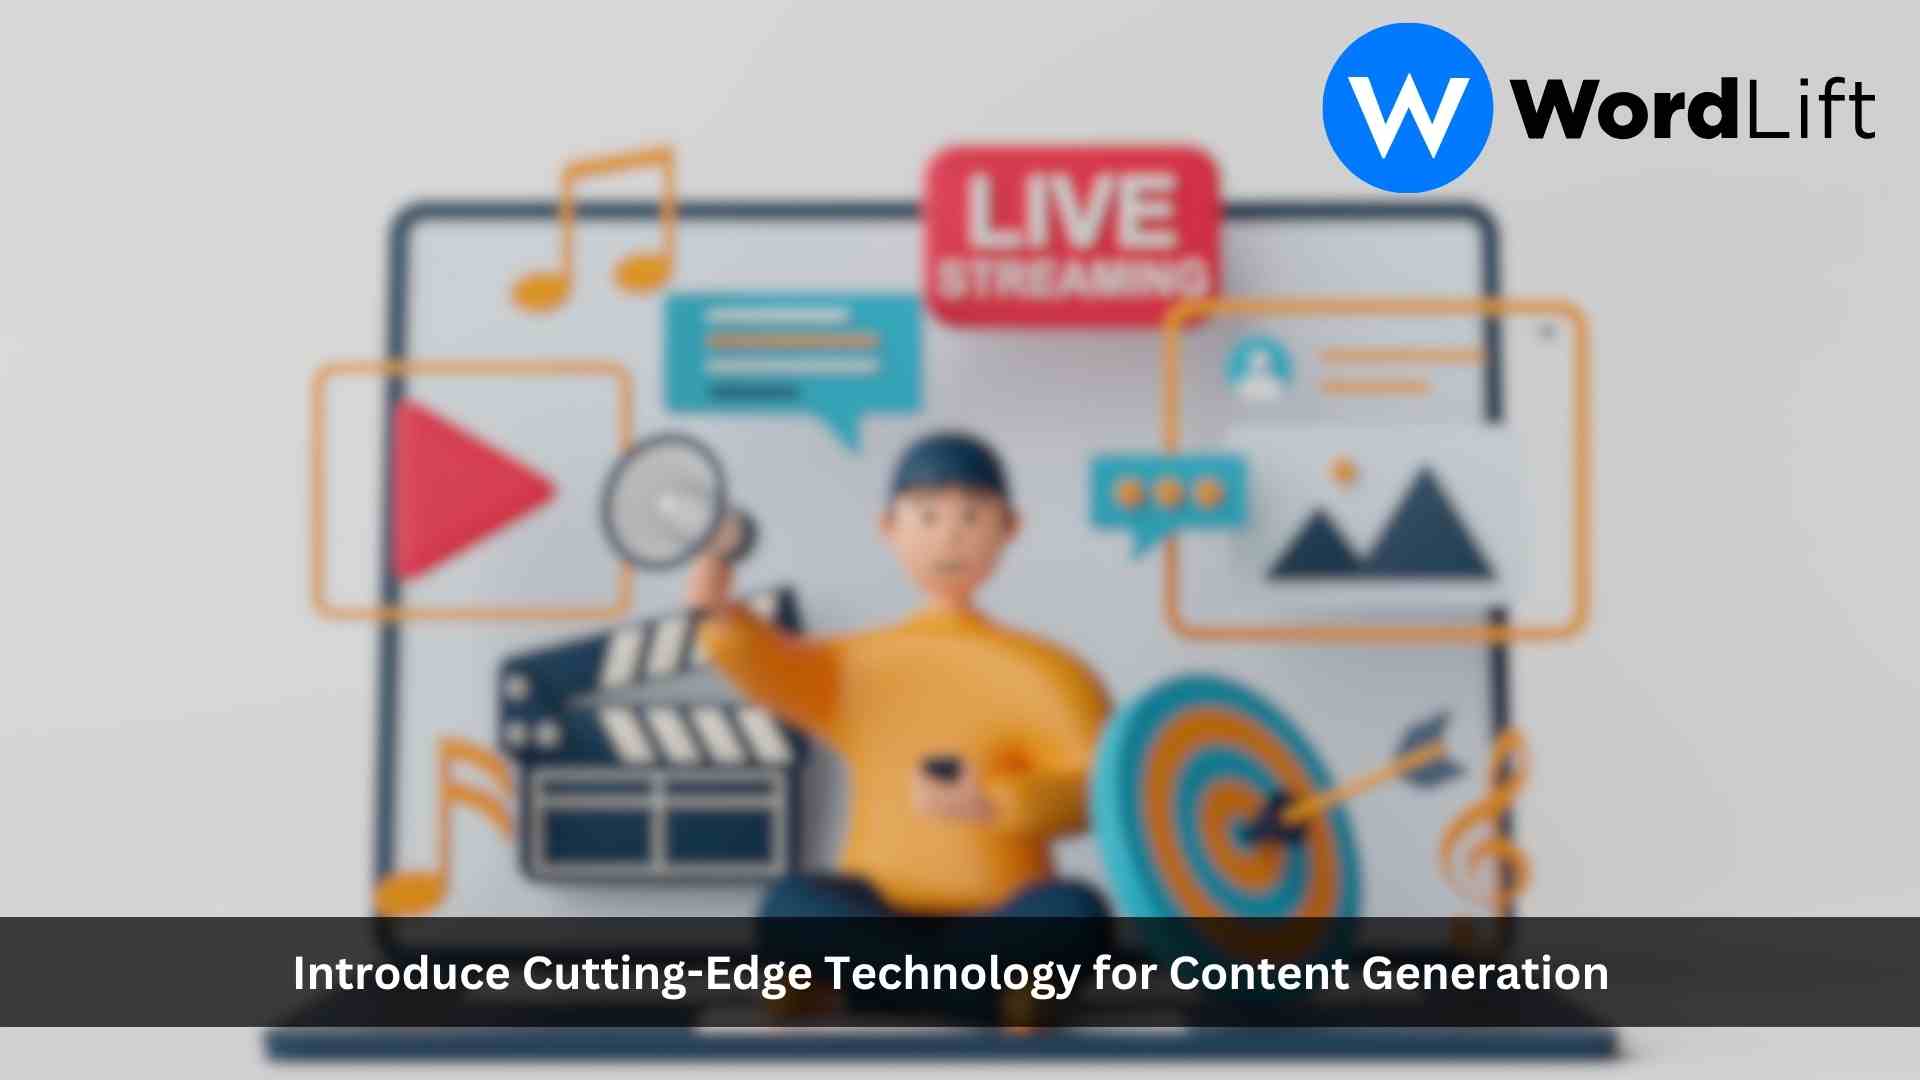 WordLift: The World of Content Creation Transformed